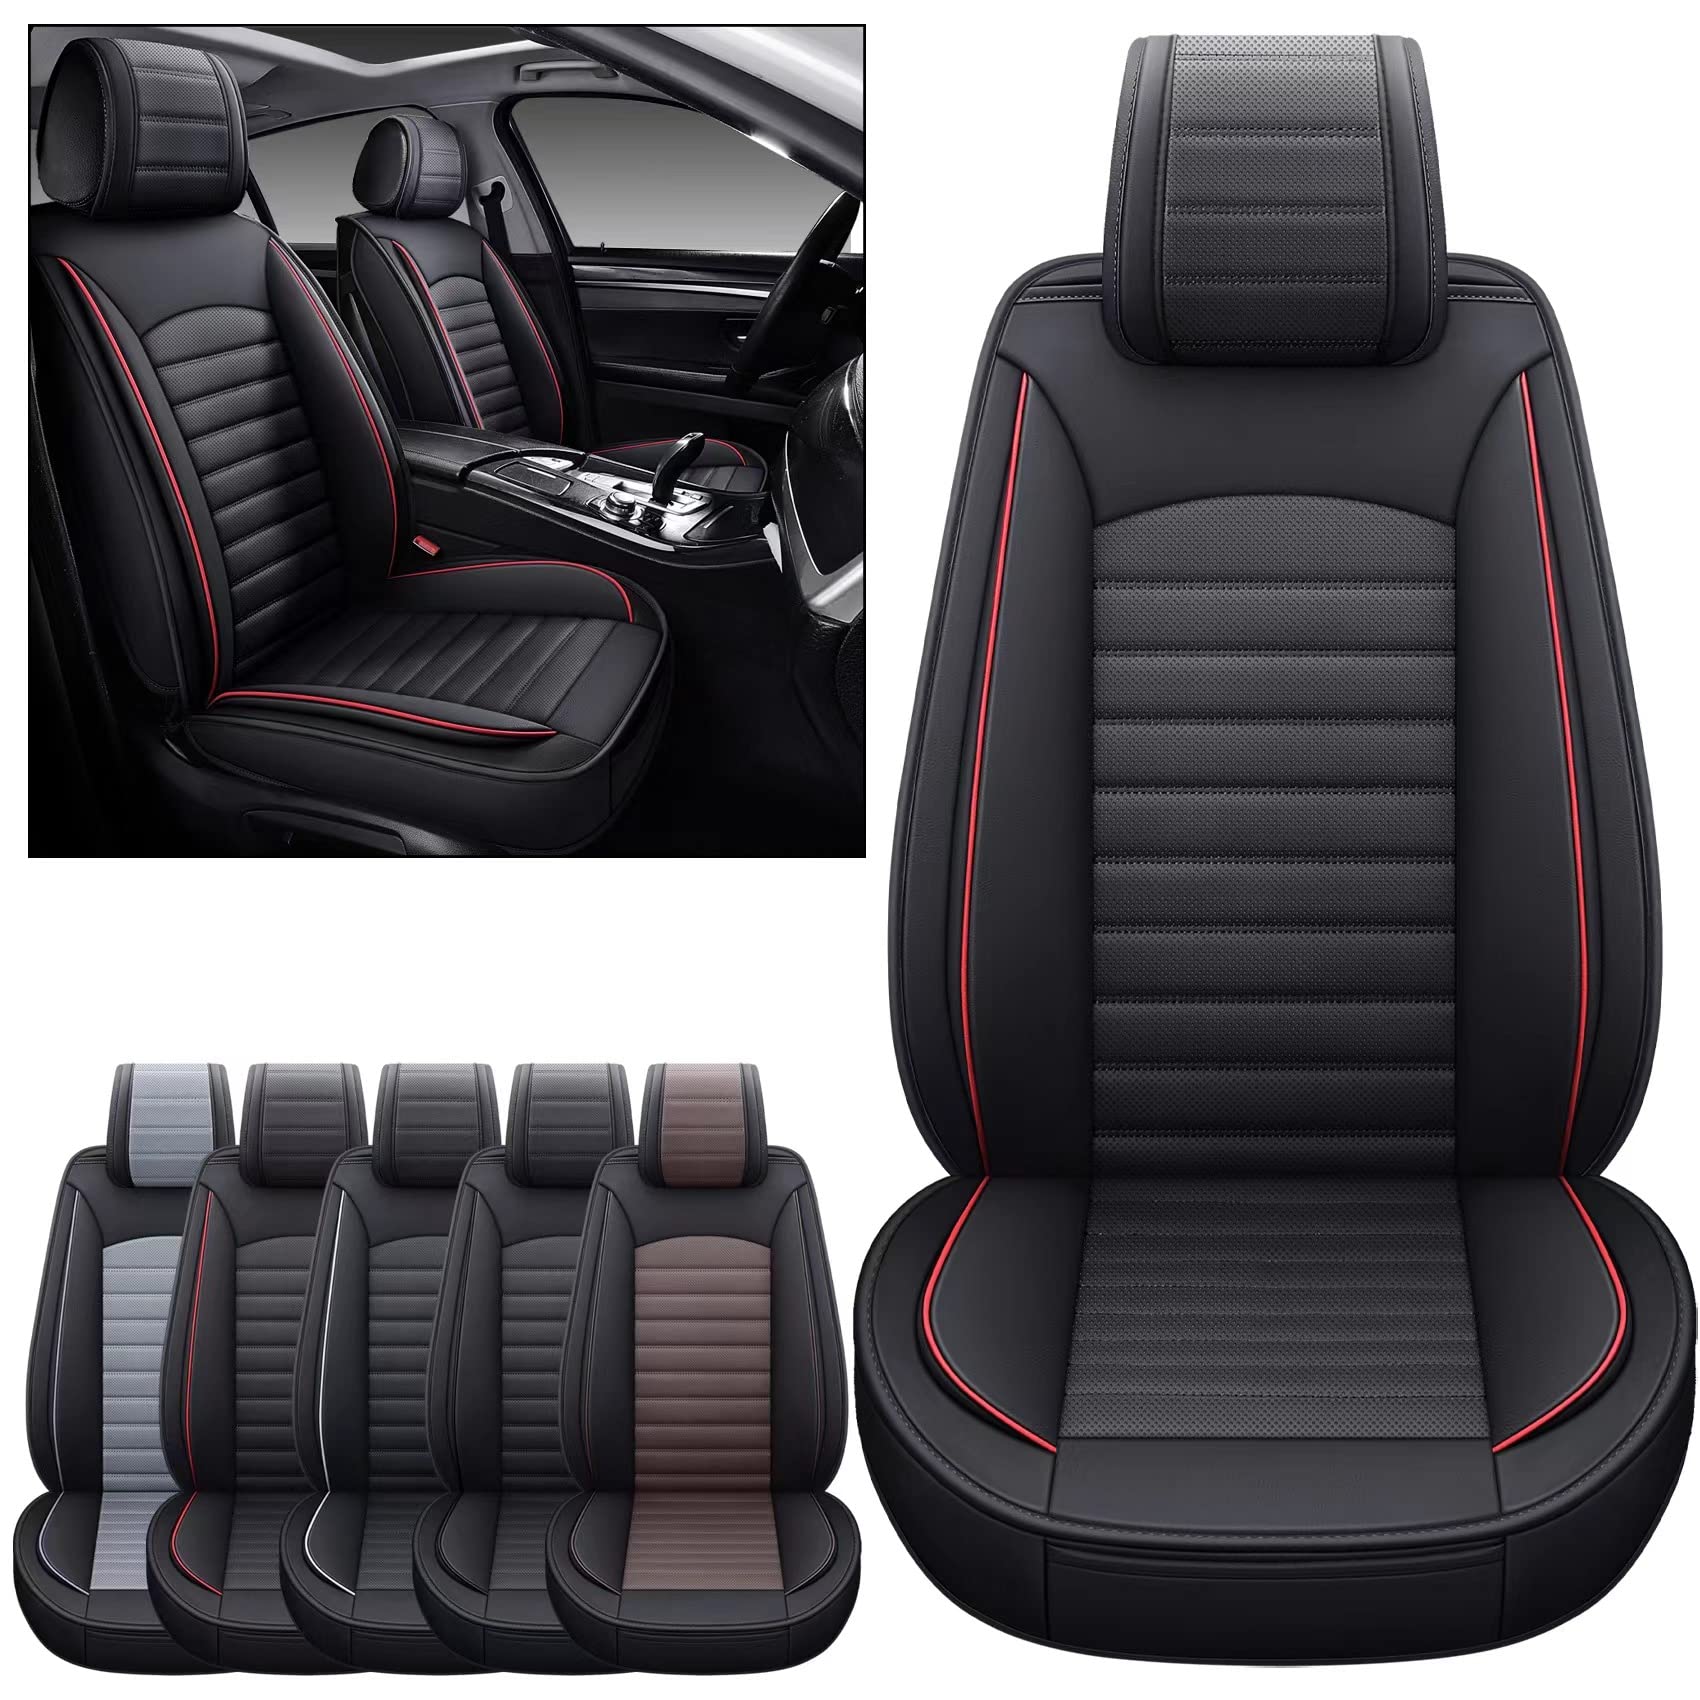 OMOKA AUTO car Seat covers with Waterproof Leather,Vehicle cushion cover for cars SUV Sedan Pick-up Truck Universal Fit Set for 